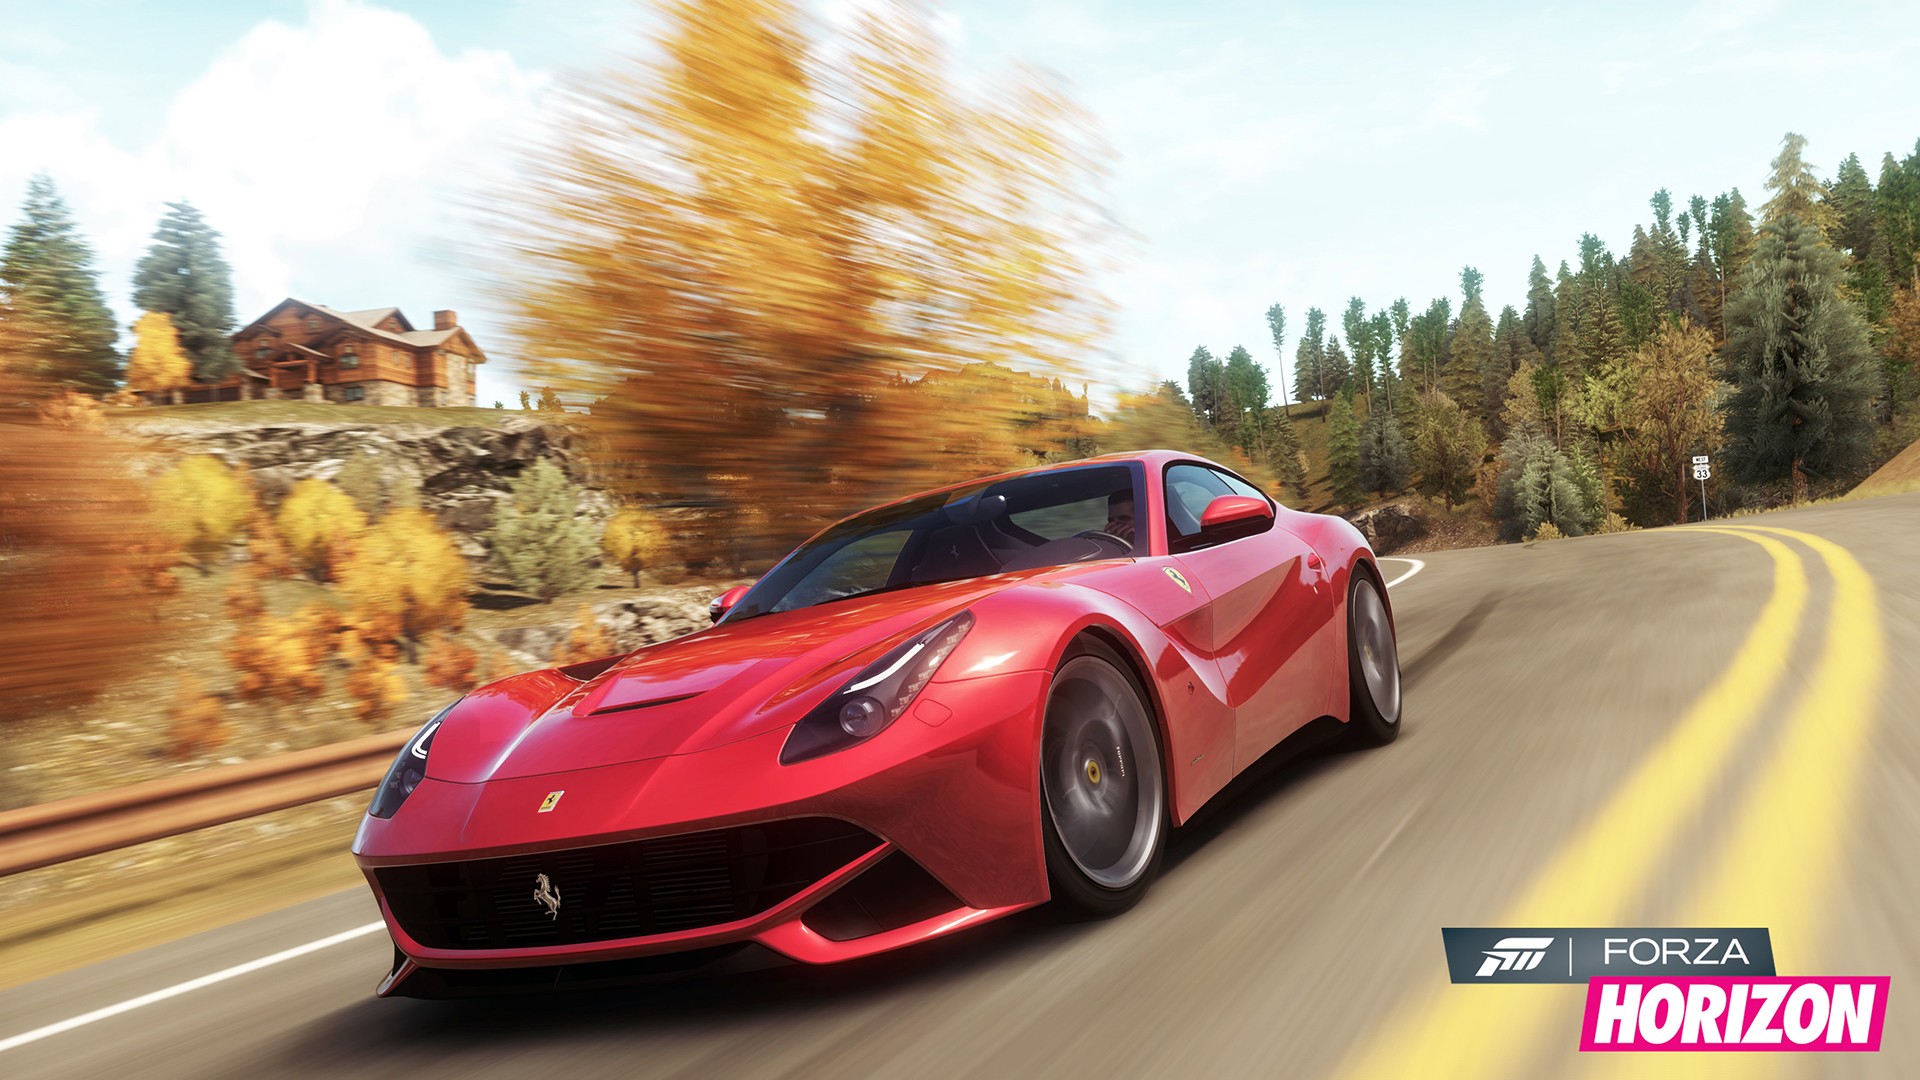 Forza Horizon Wallpapers, Pictures, Images